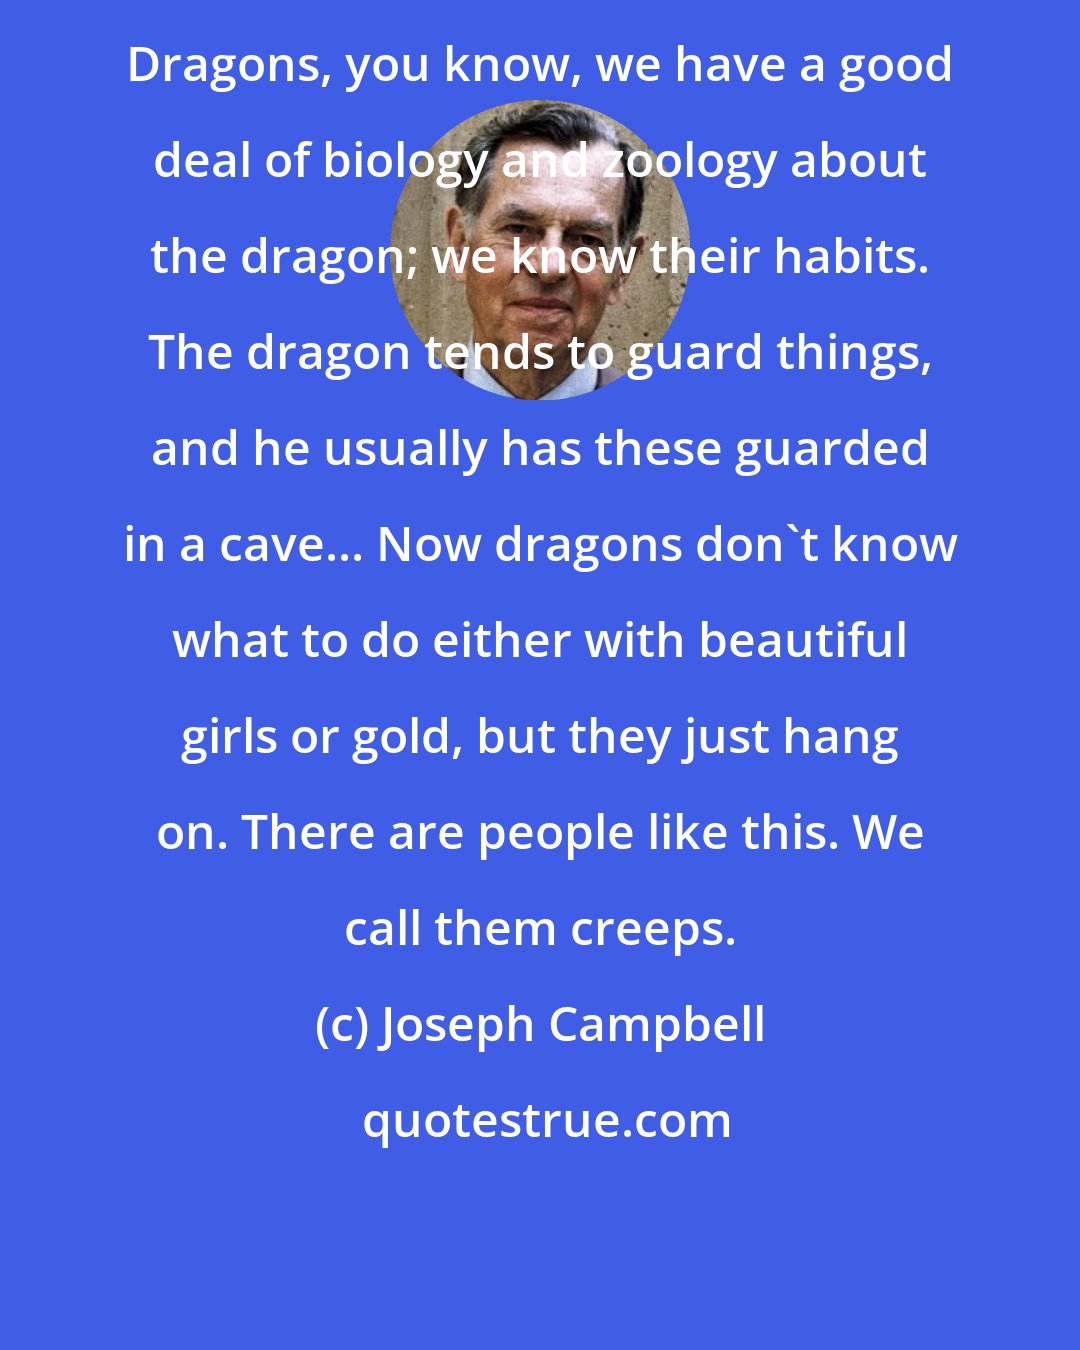 Joseph Campbell: Dragons, you know, we have a good deal of biology and zoology about the dragon; we know their habits. The dragon tends to guard things, and he usually has these guarded in a cave... Now dragons don't know what to do either with beautiful girls or gold, but they just hang on. There are people like this. We call them creeps.